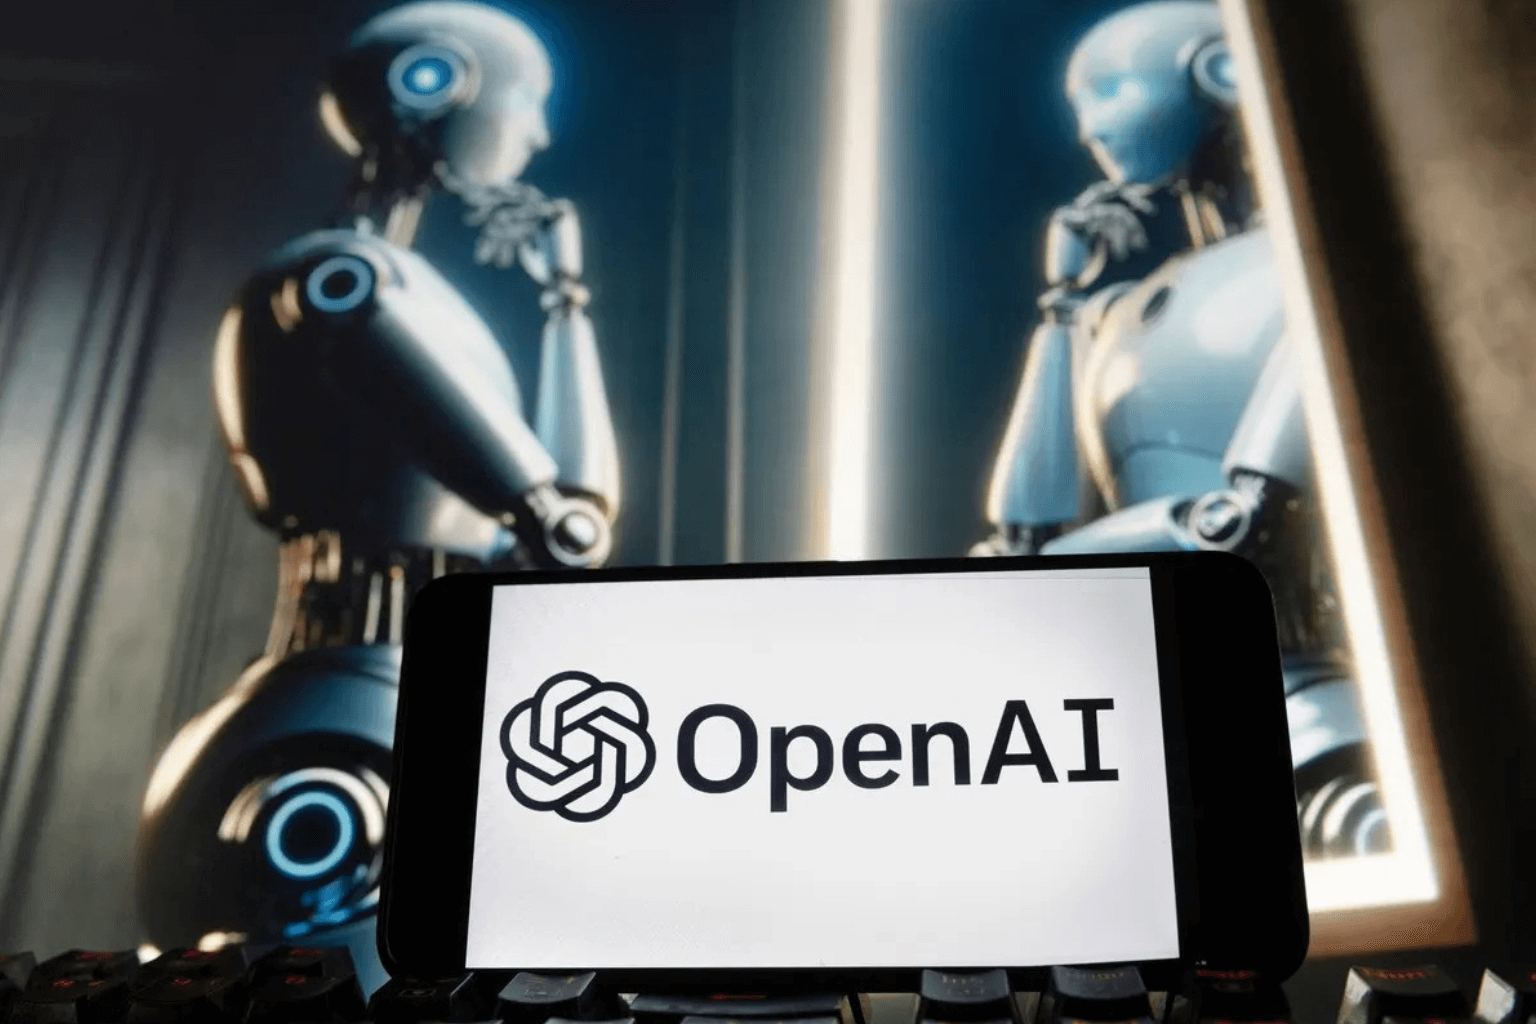 OpenAI's secrets were stolen by hackers, raising concerns about China's possible involvement